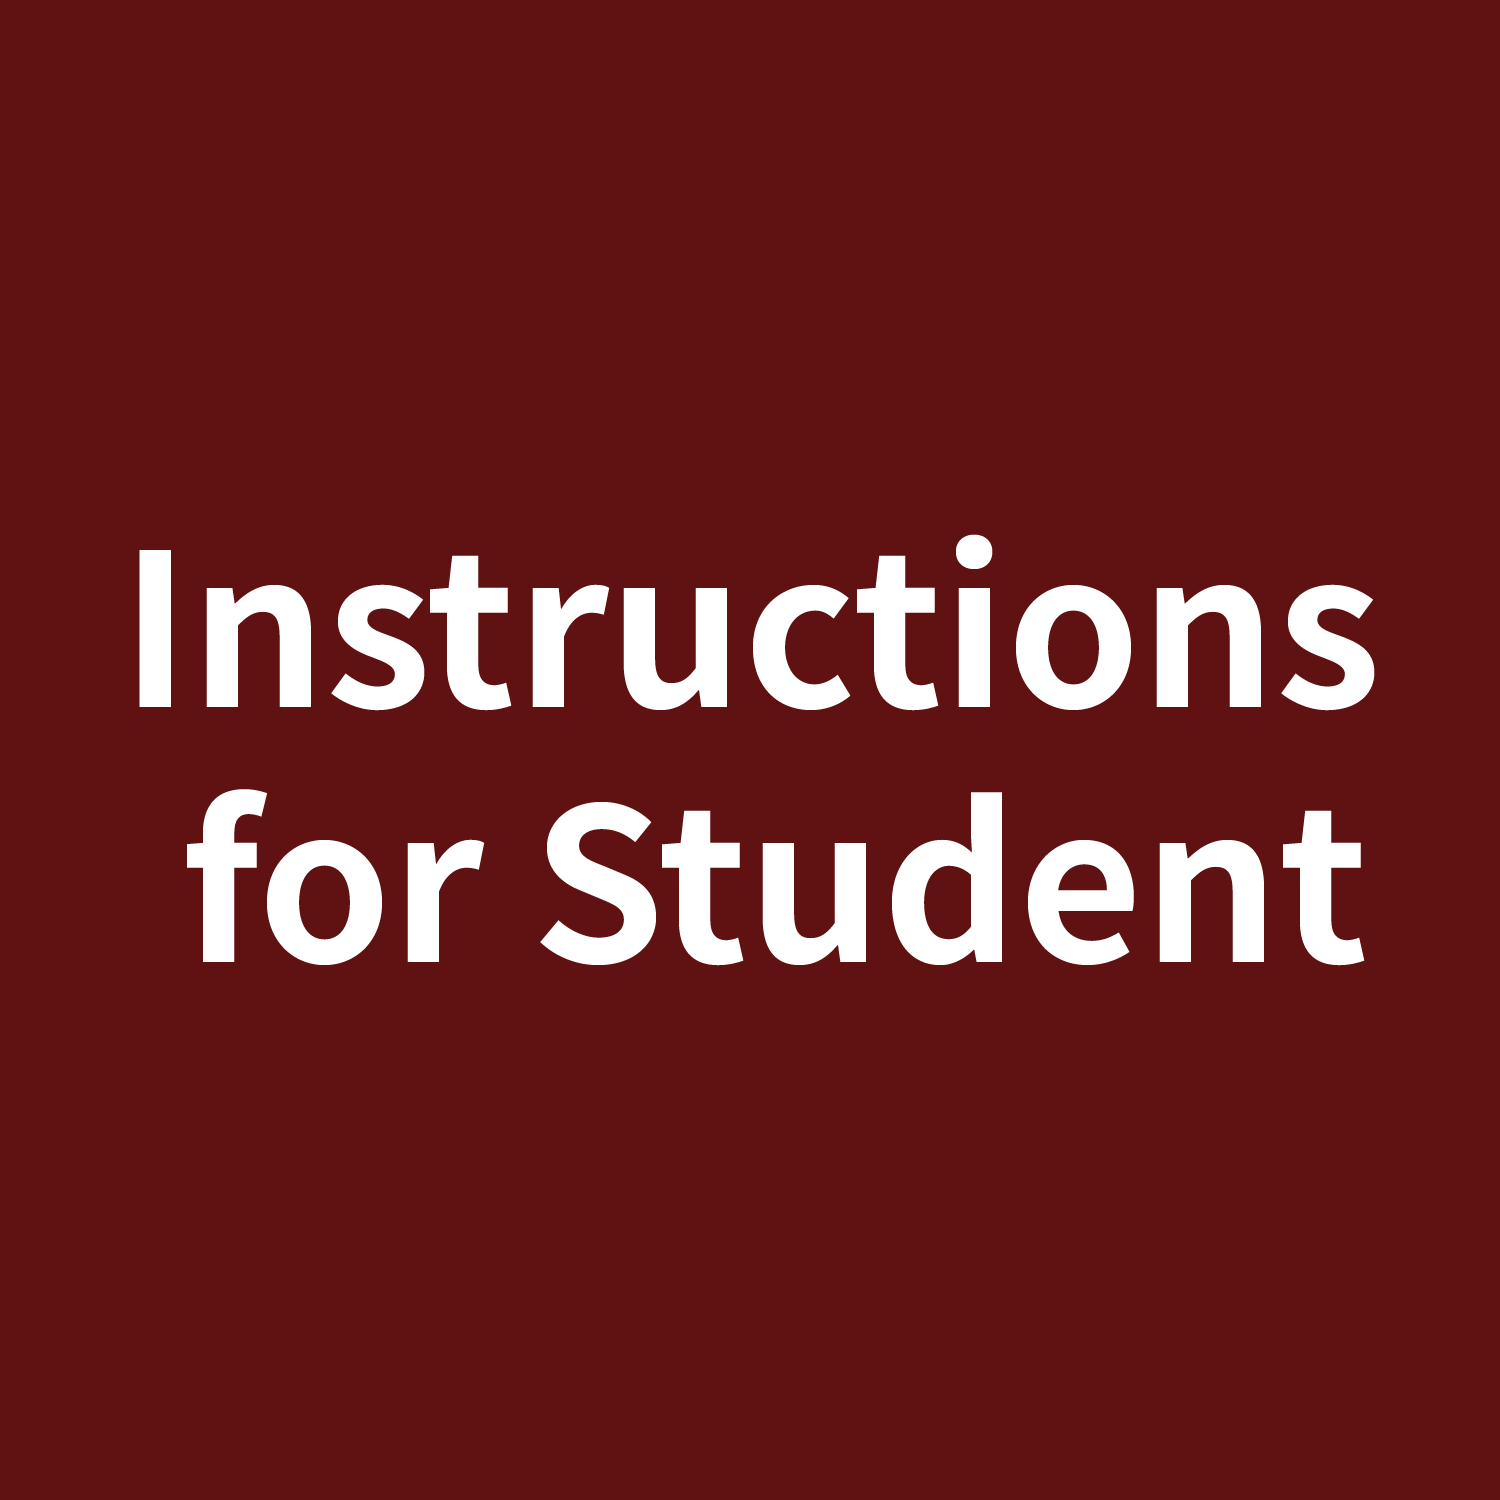 Instructions for Student Login and Course Selection